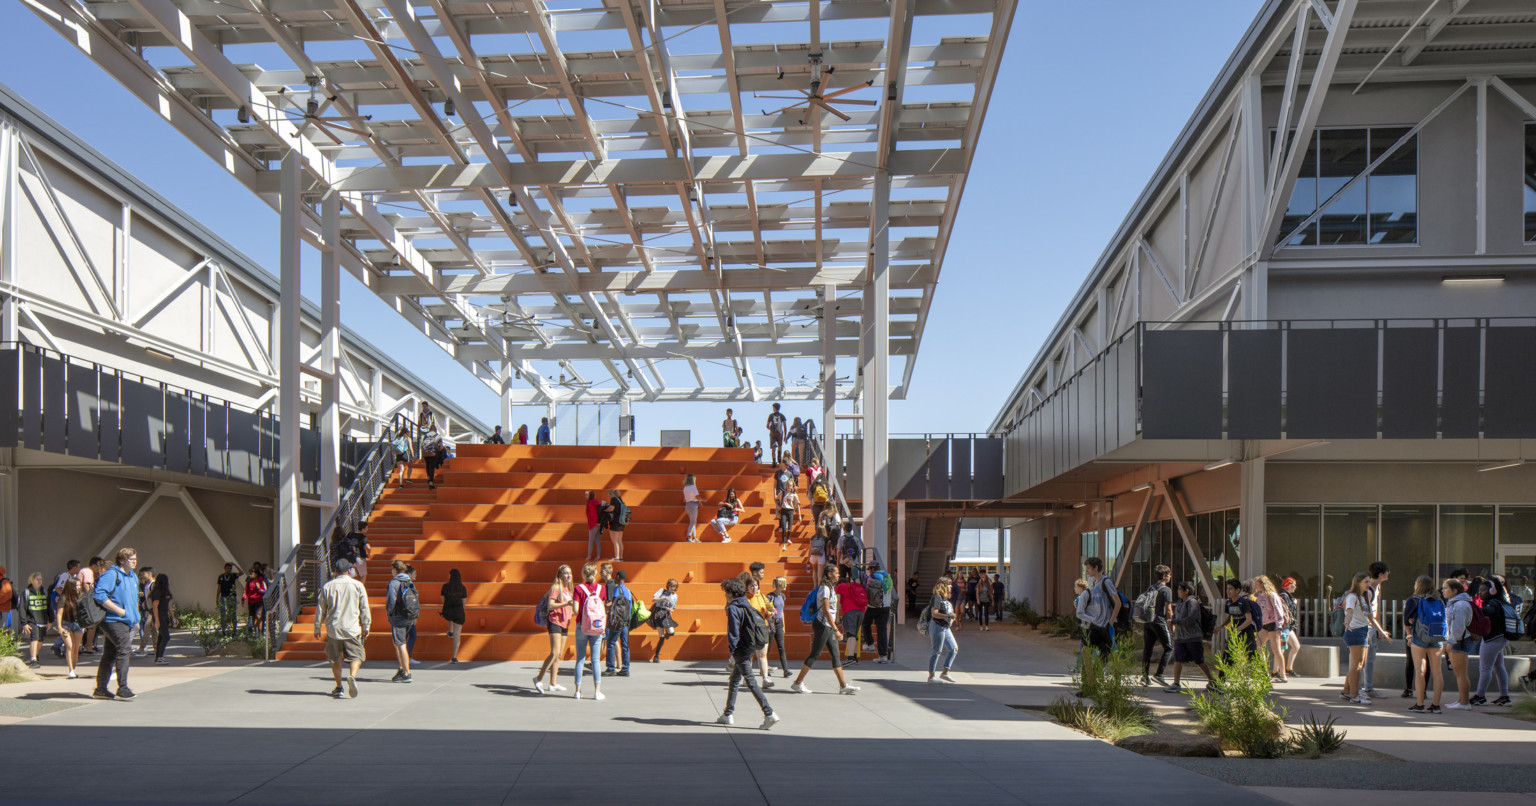 Looking out to students on orange bleacher steps partially cover by a solar canopy